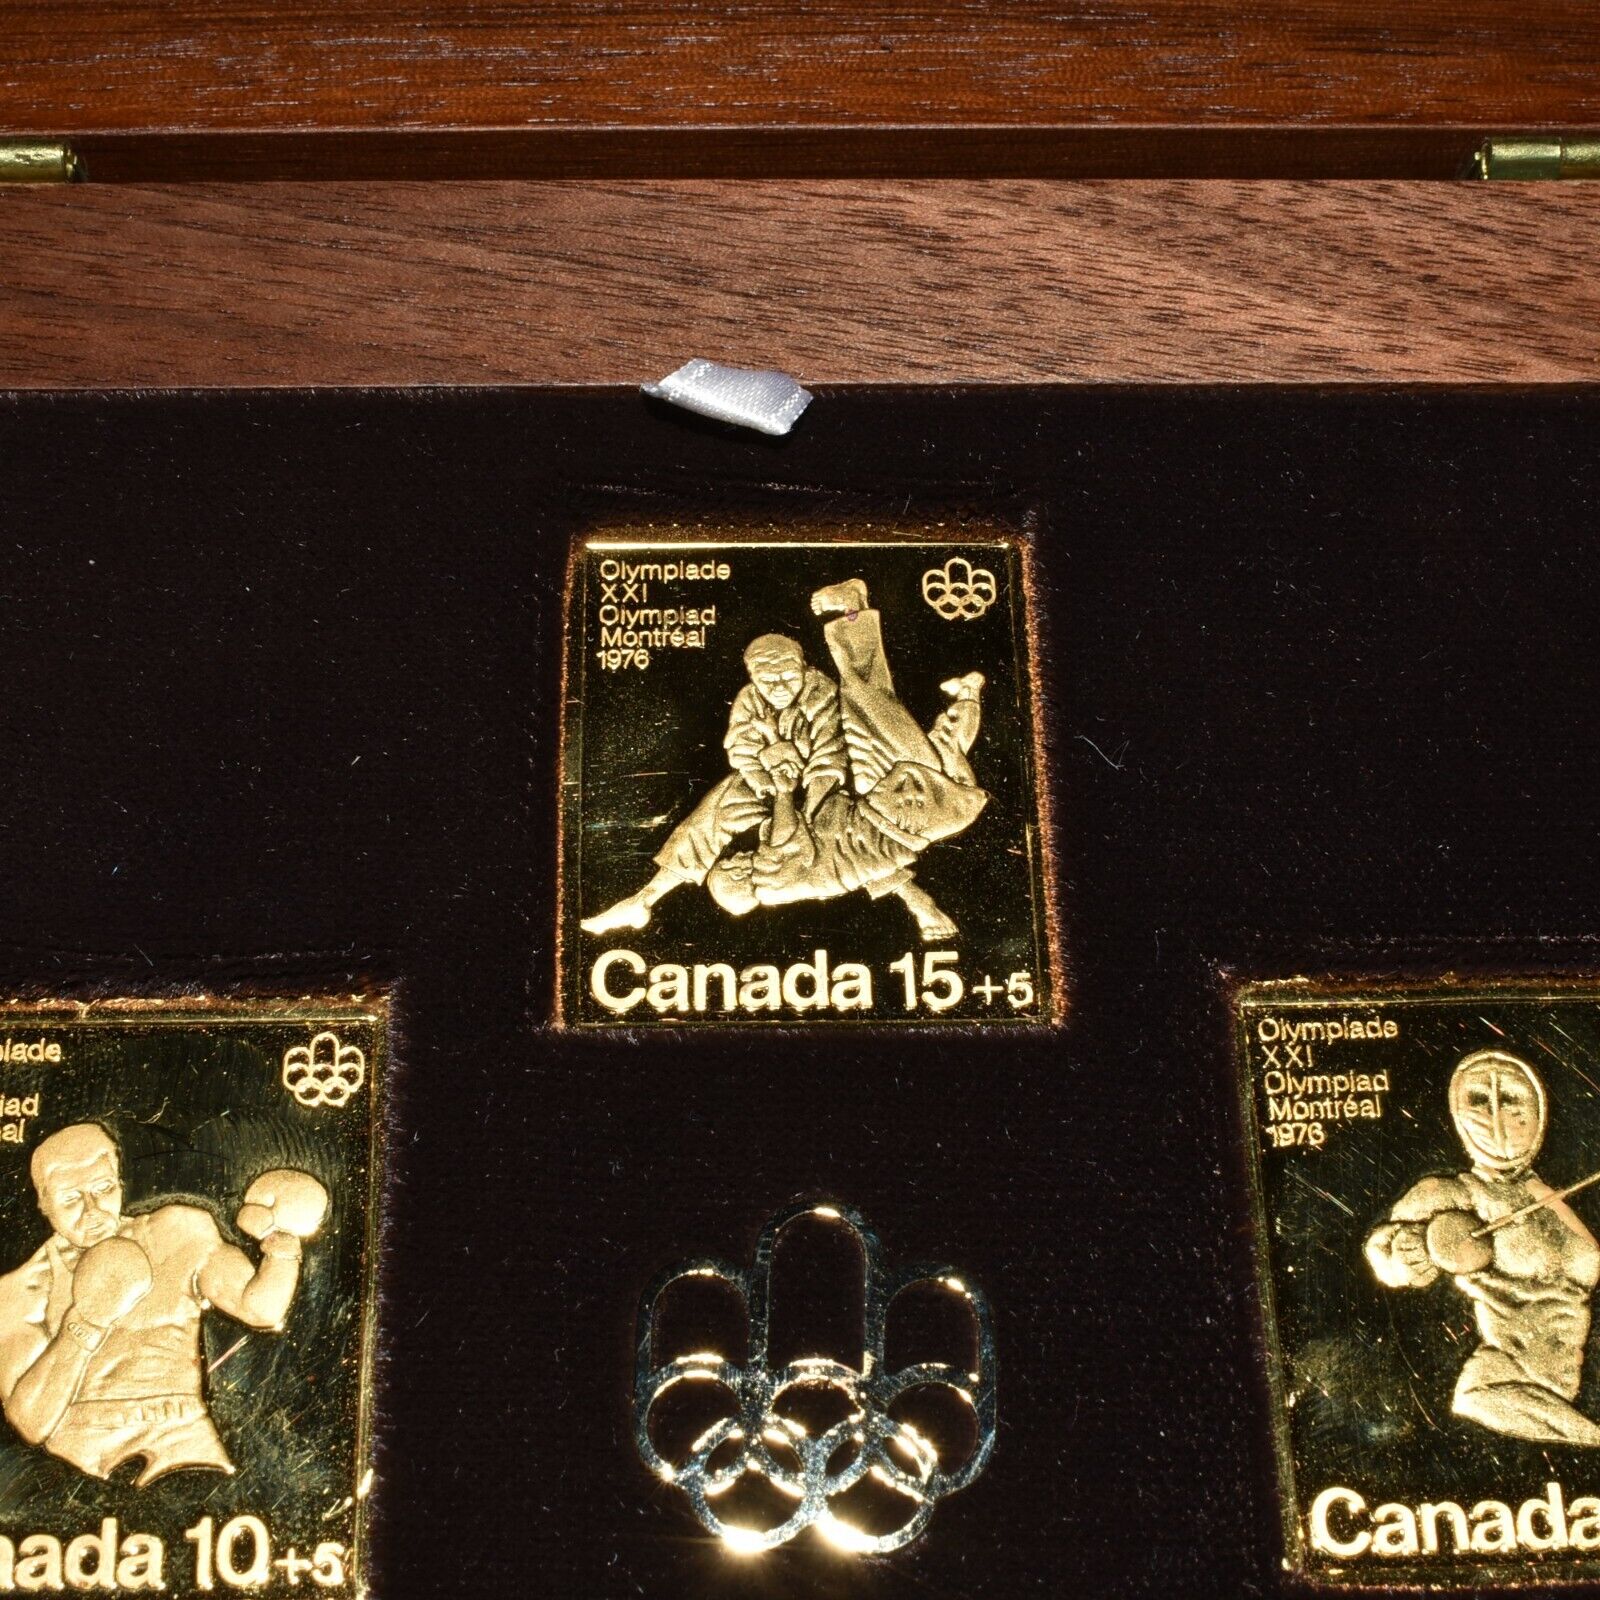 1976 Canada Post Olympic 24k Gold Stamp Set - JM & Mallory Ultra Rare 👀